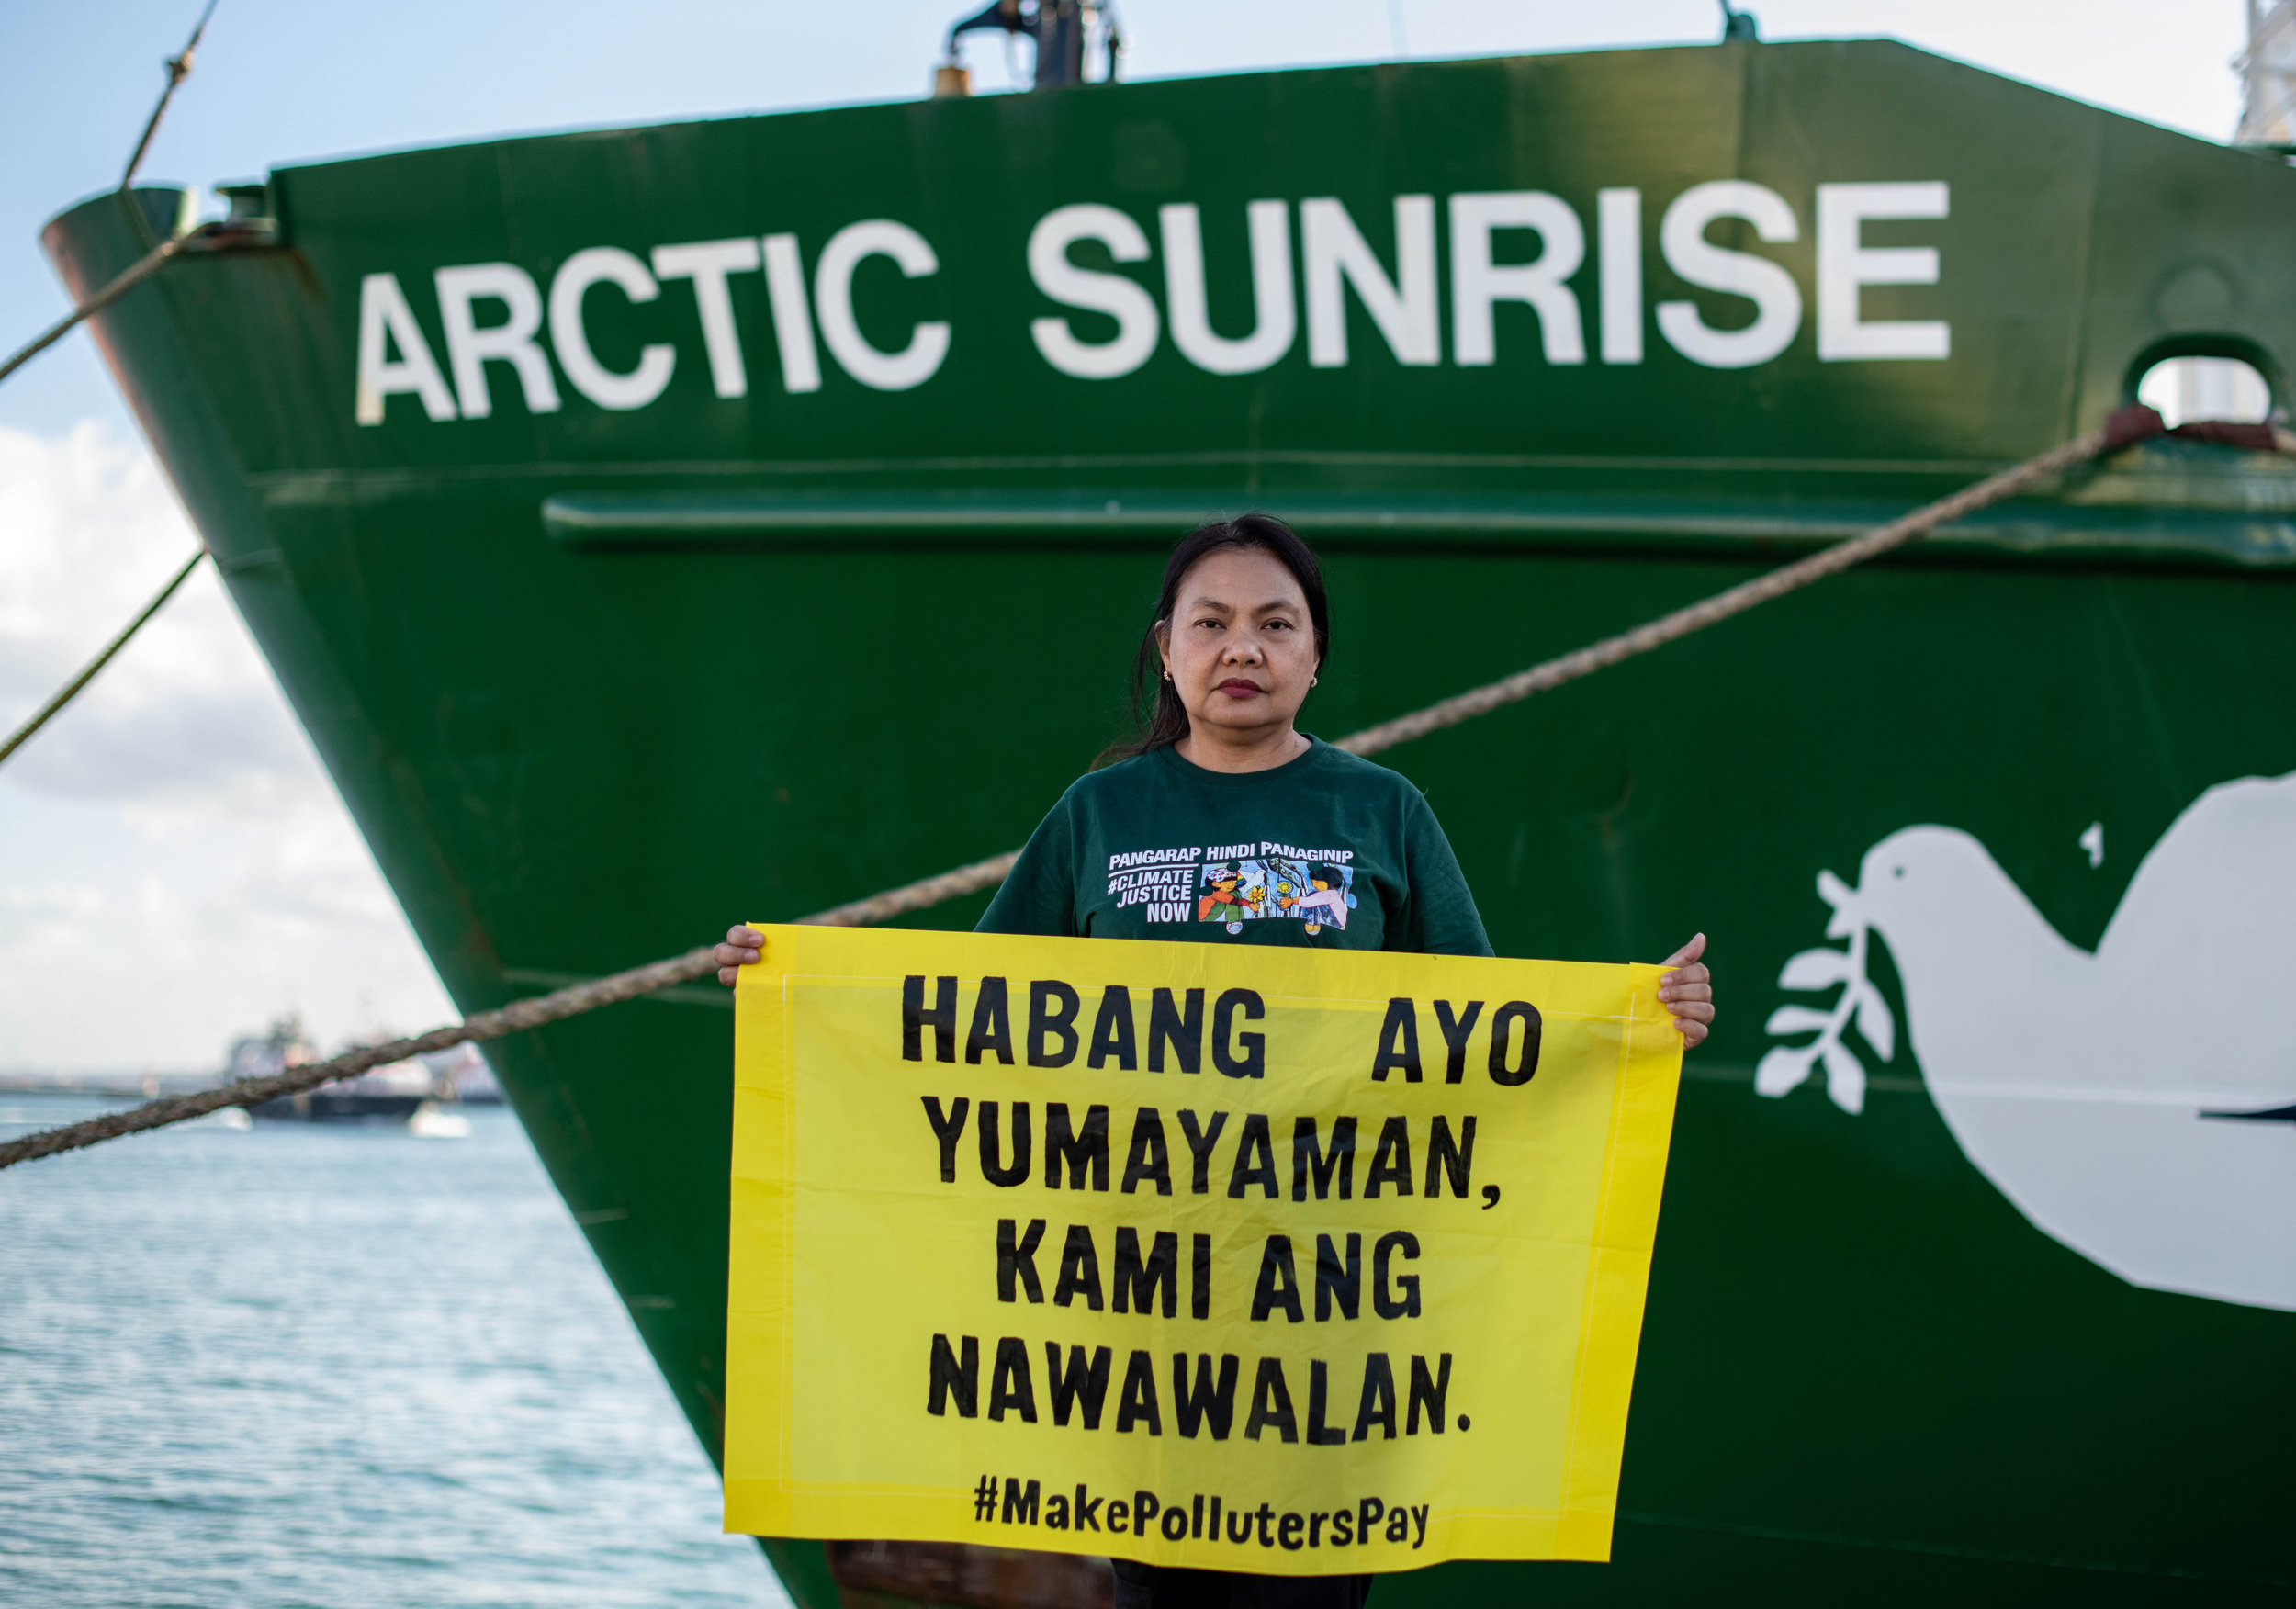 Virginia holds a yellow banner in front of the Arctic Sunrise.